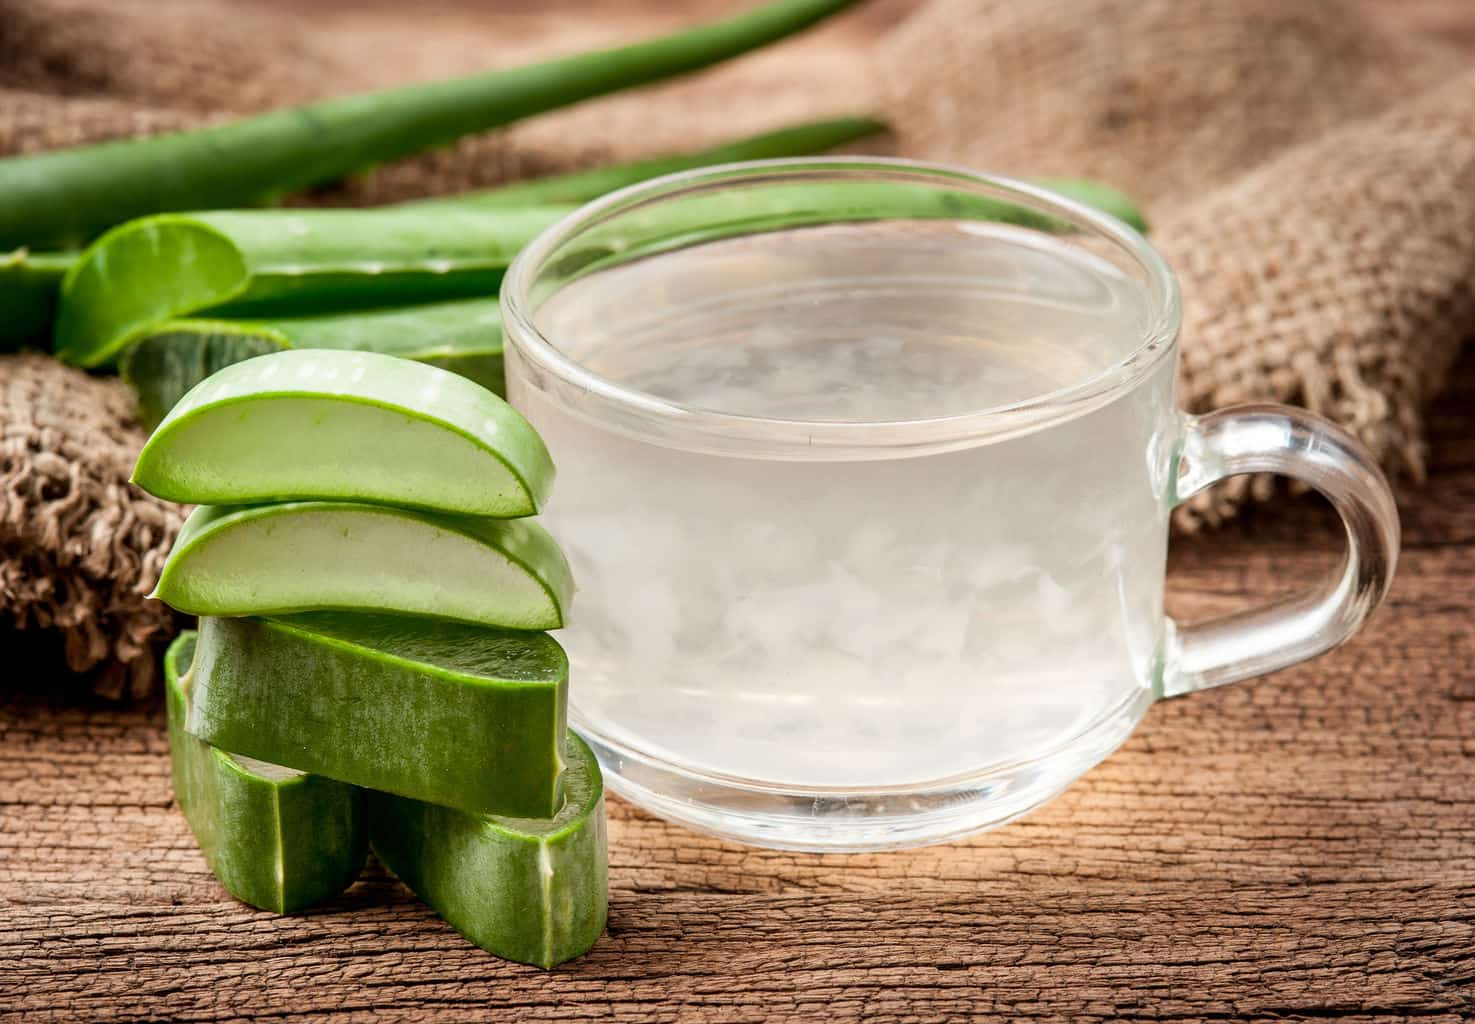 The shocking truth about Aloe Vera